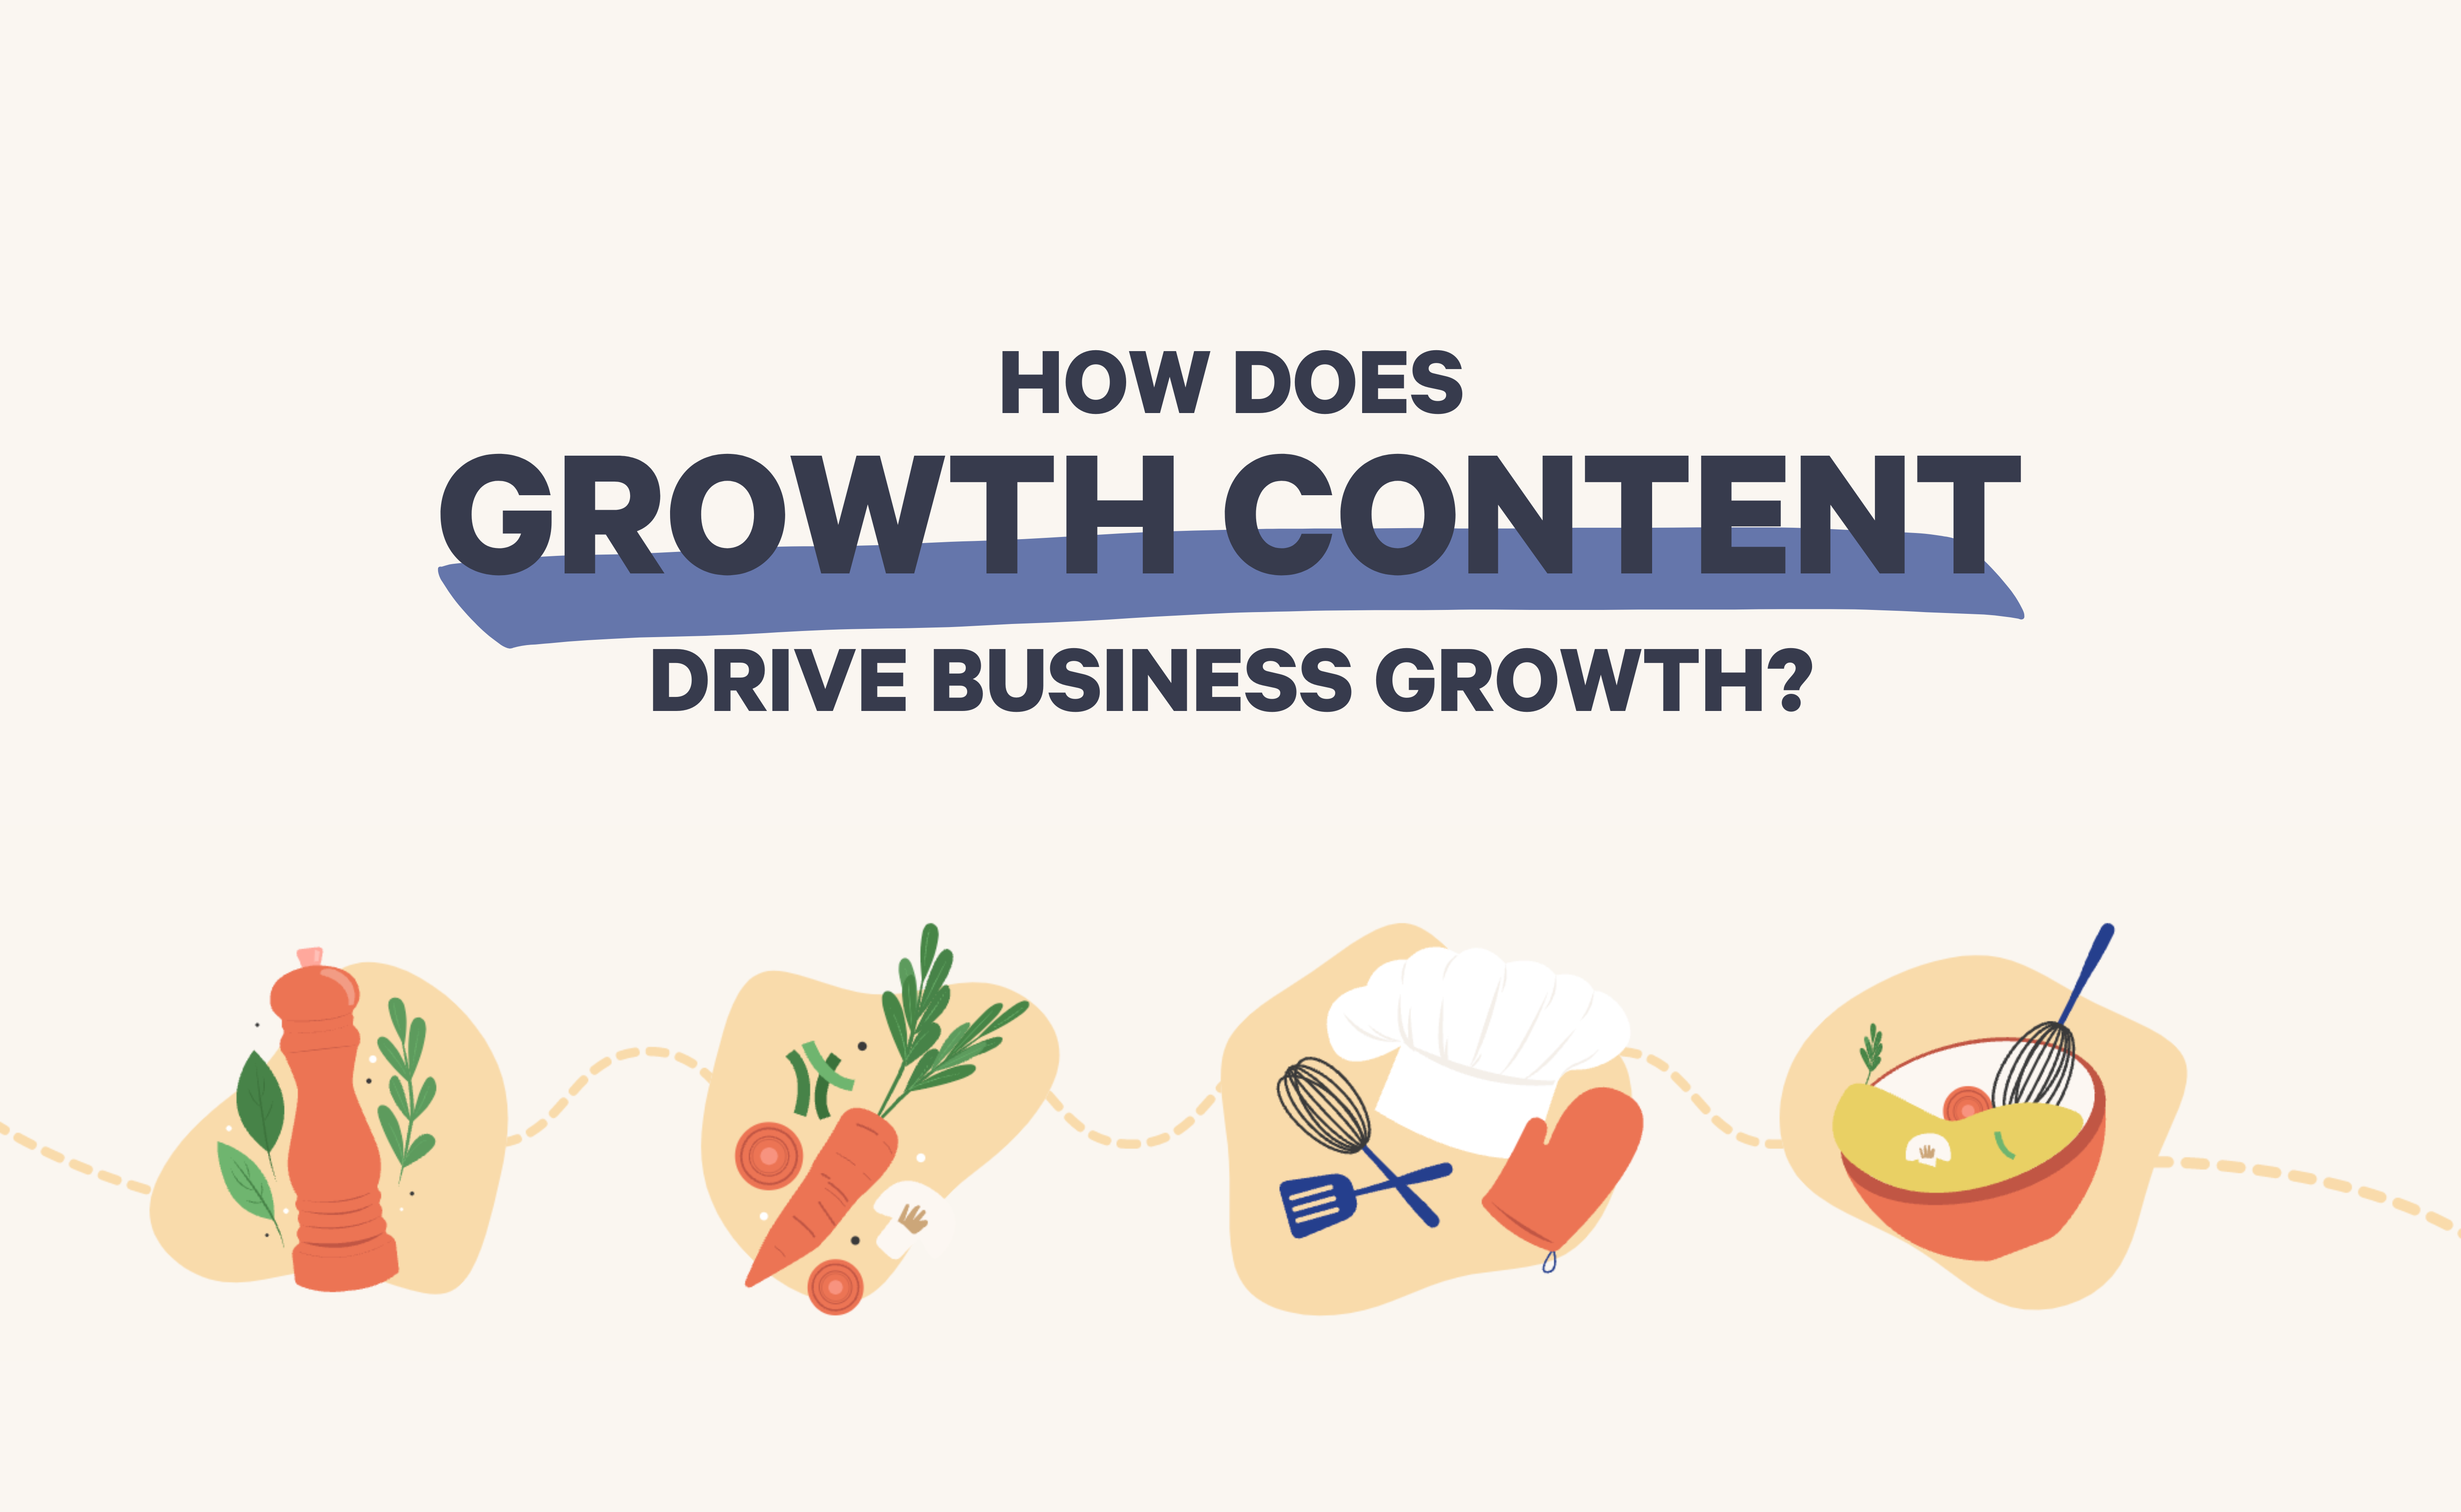 How Does Growth Content Drive Business Growth?